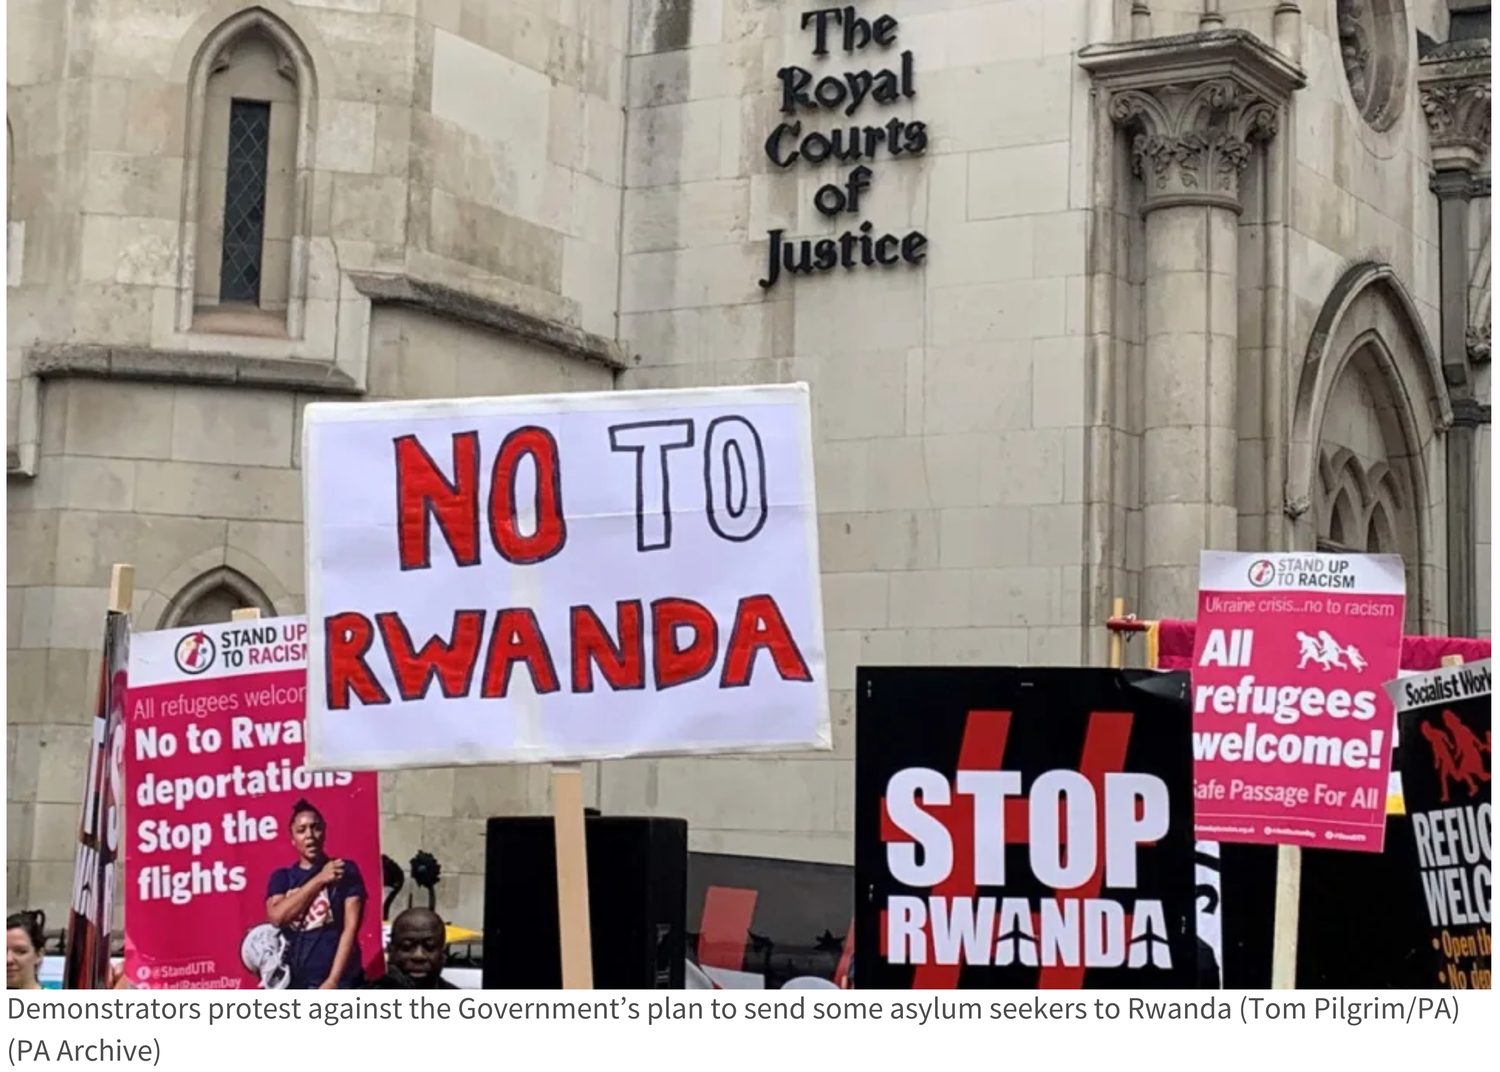 Demonstrators protest against the Government’s plan to send some asylum seekers to Rwanda